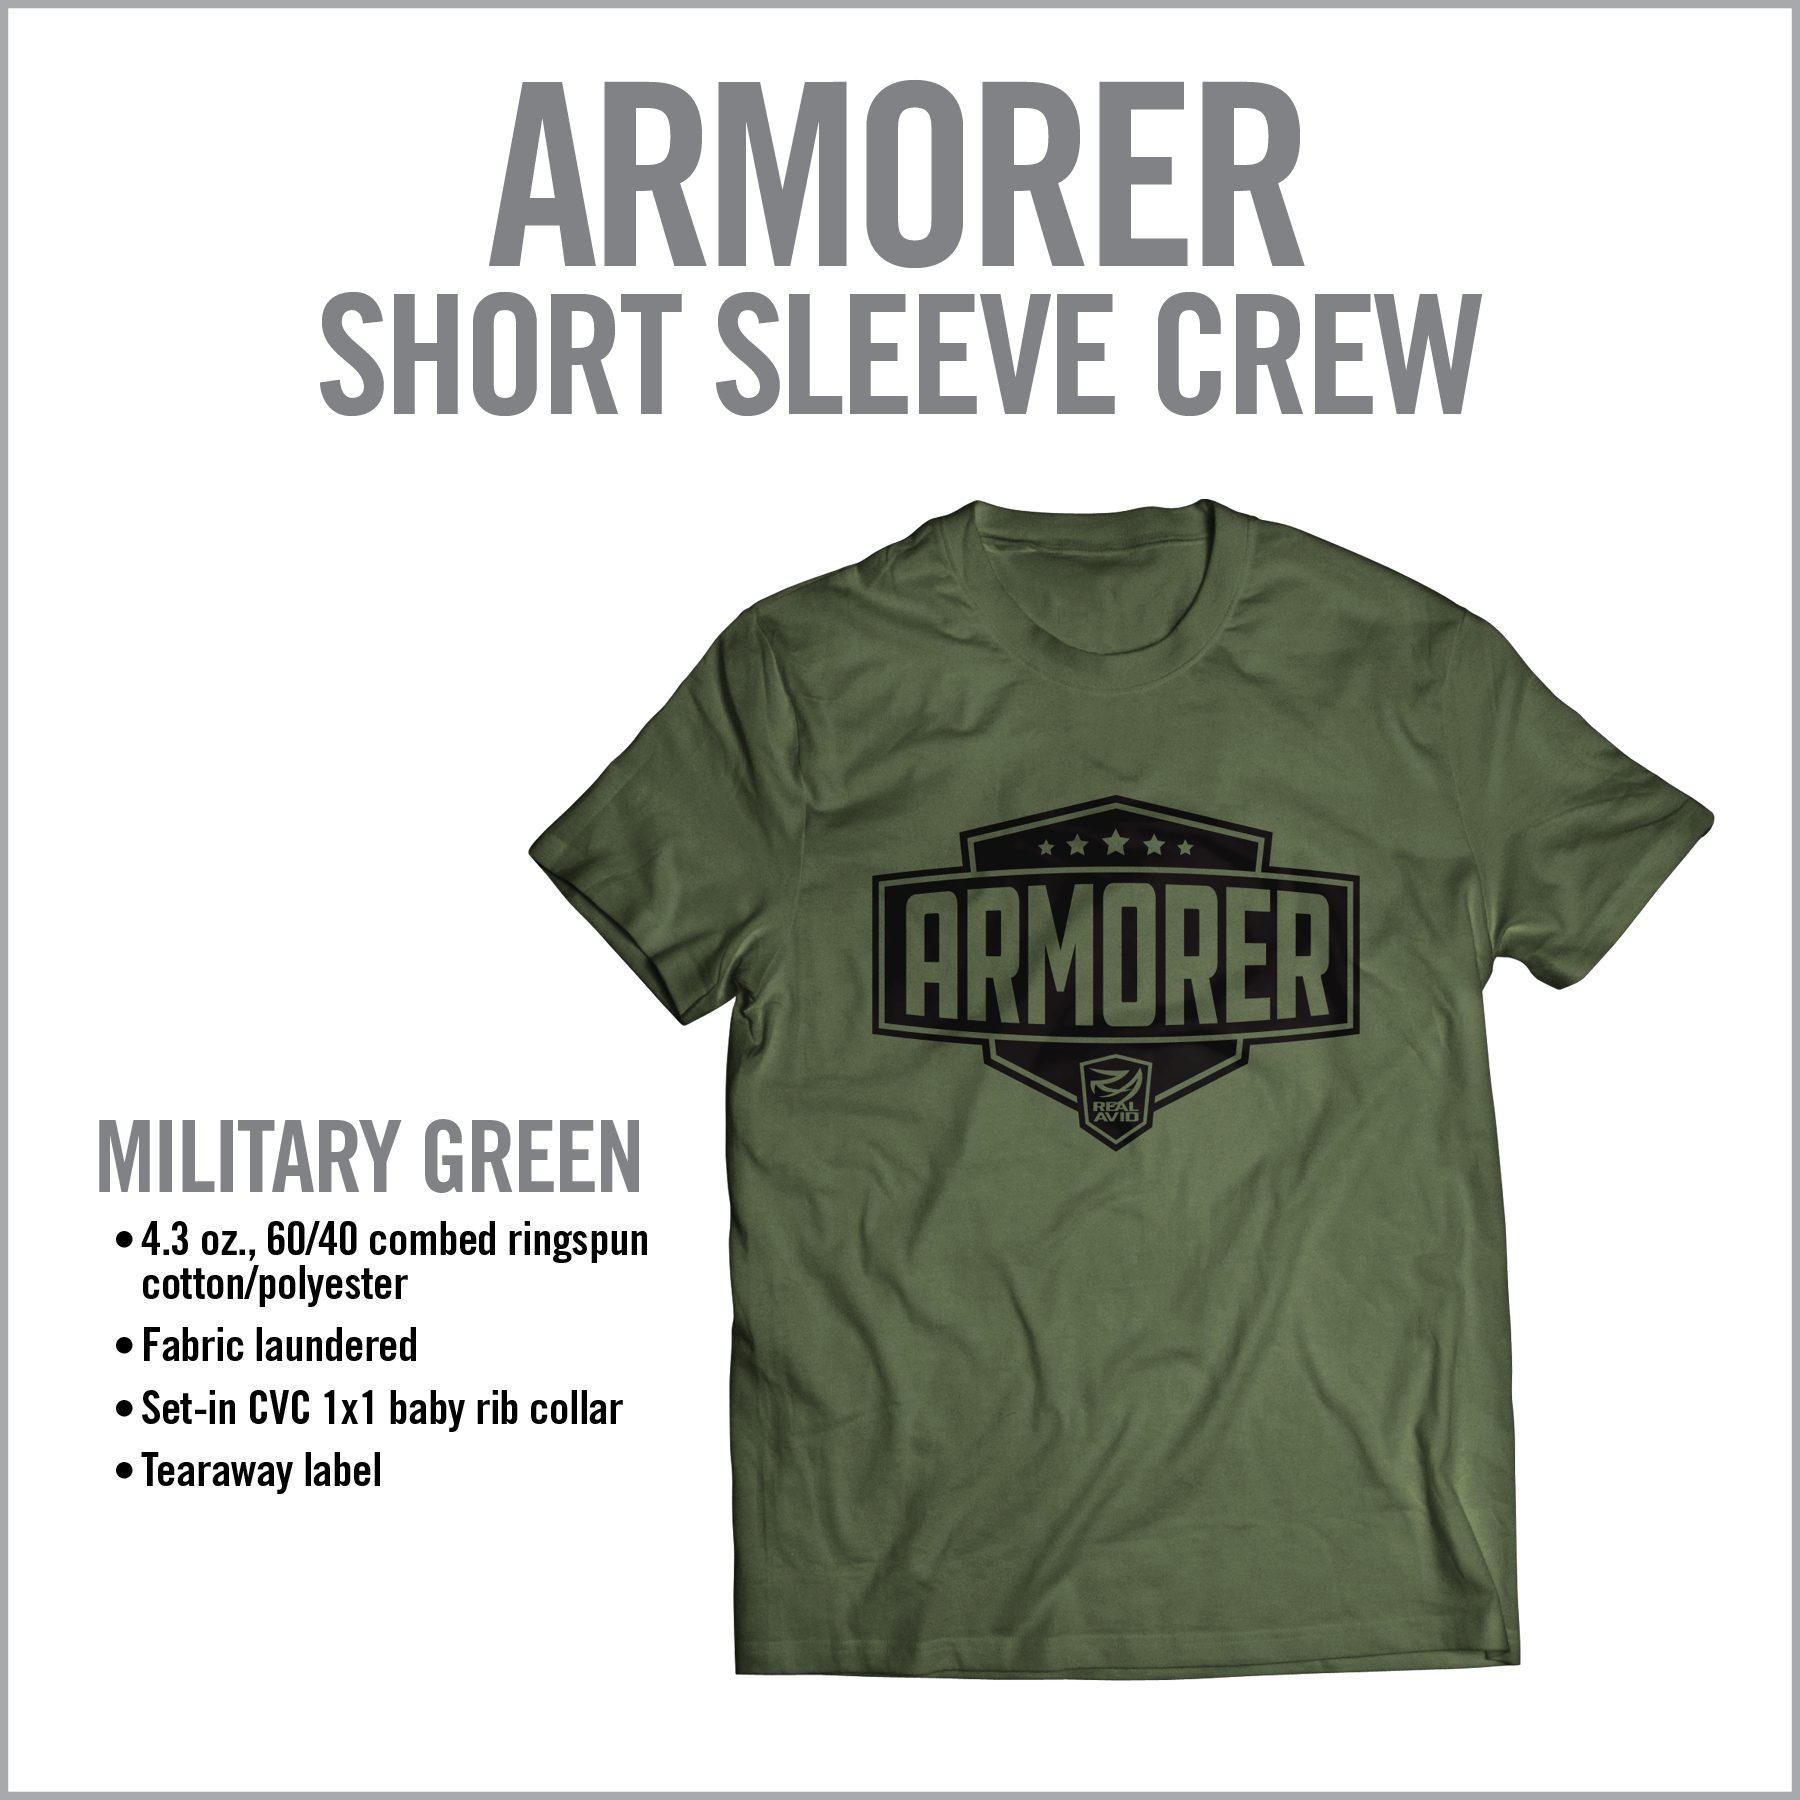 an army green shirt with the words armor on it